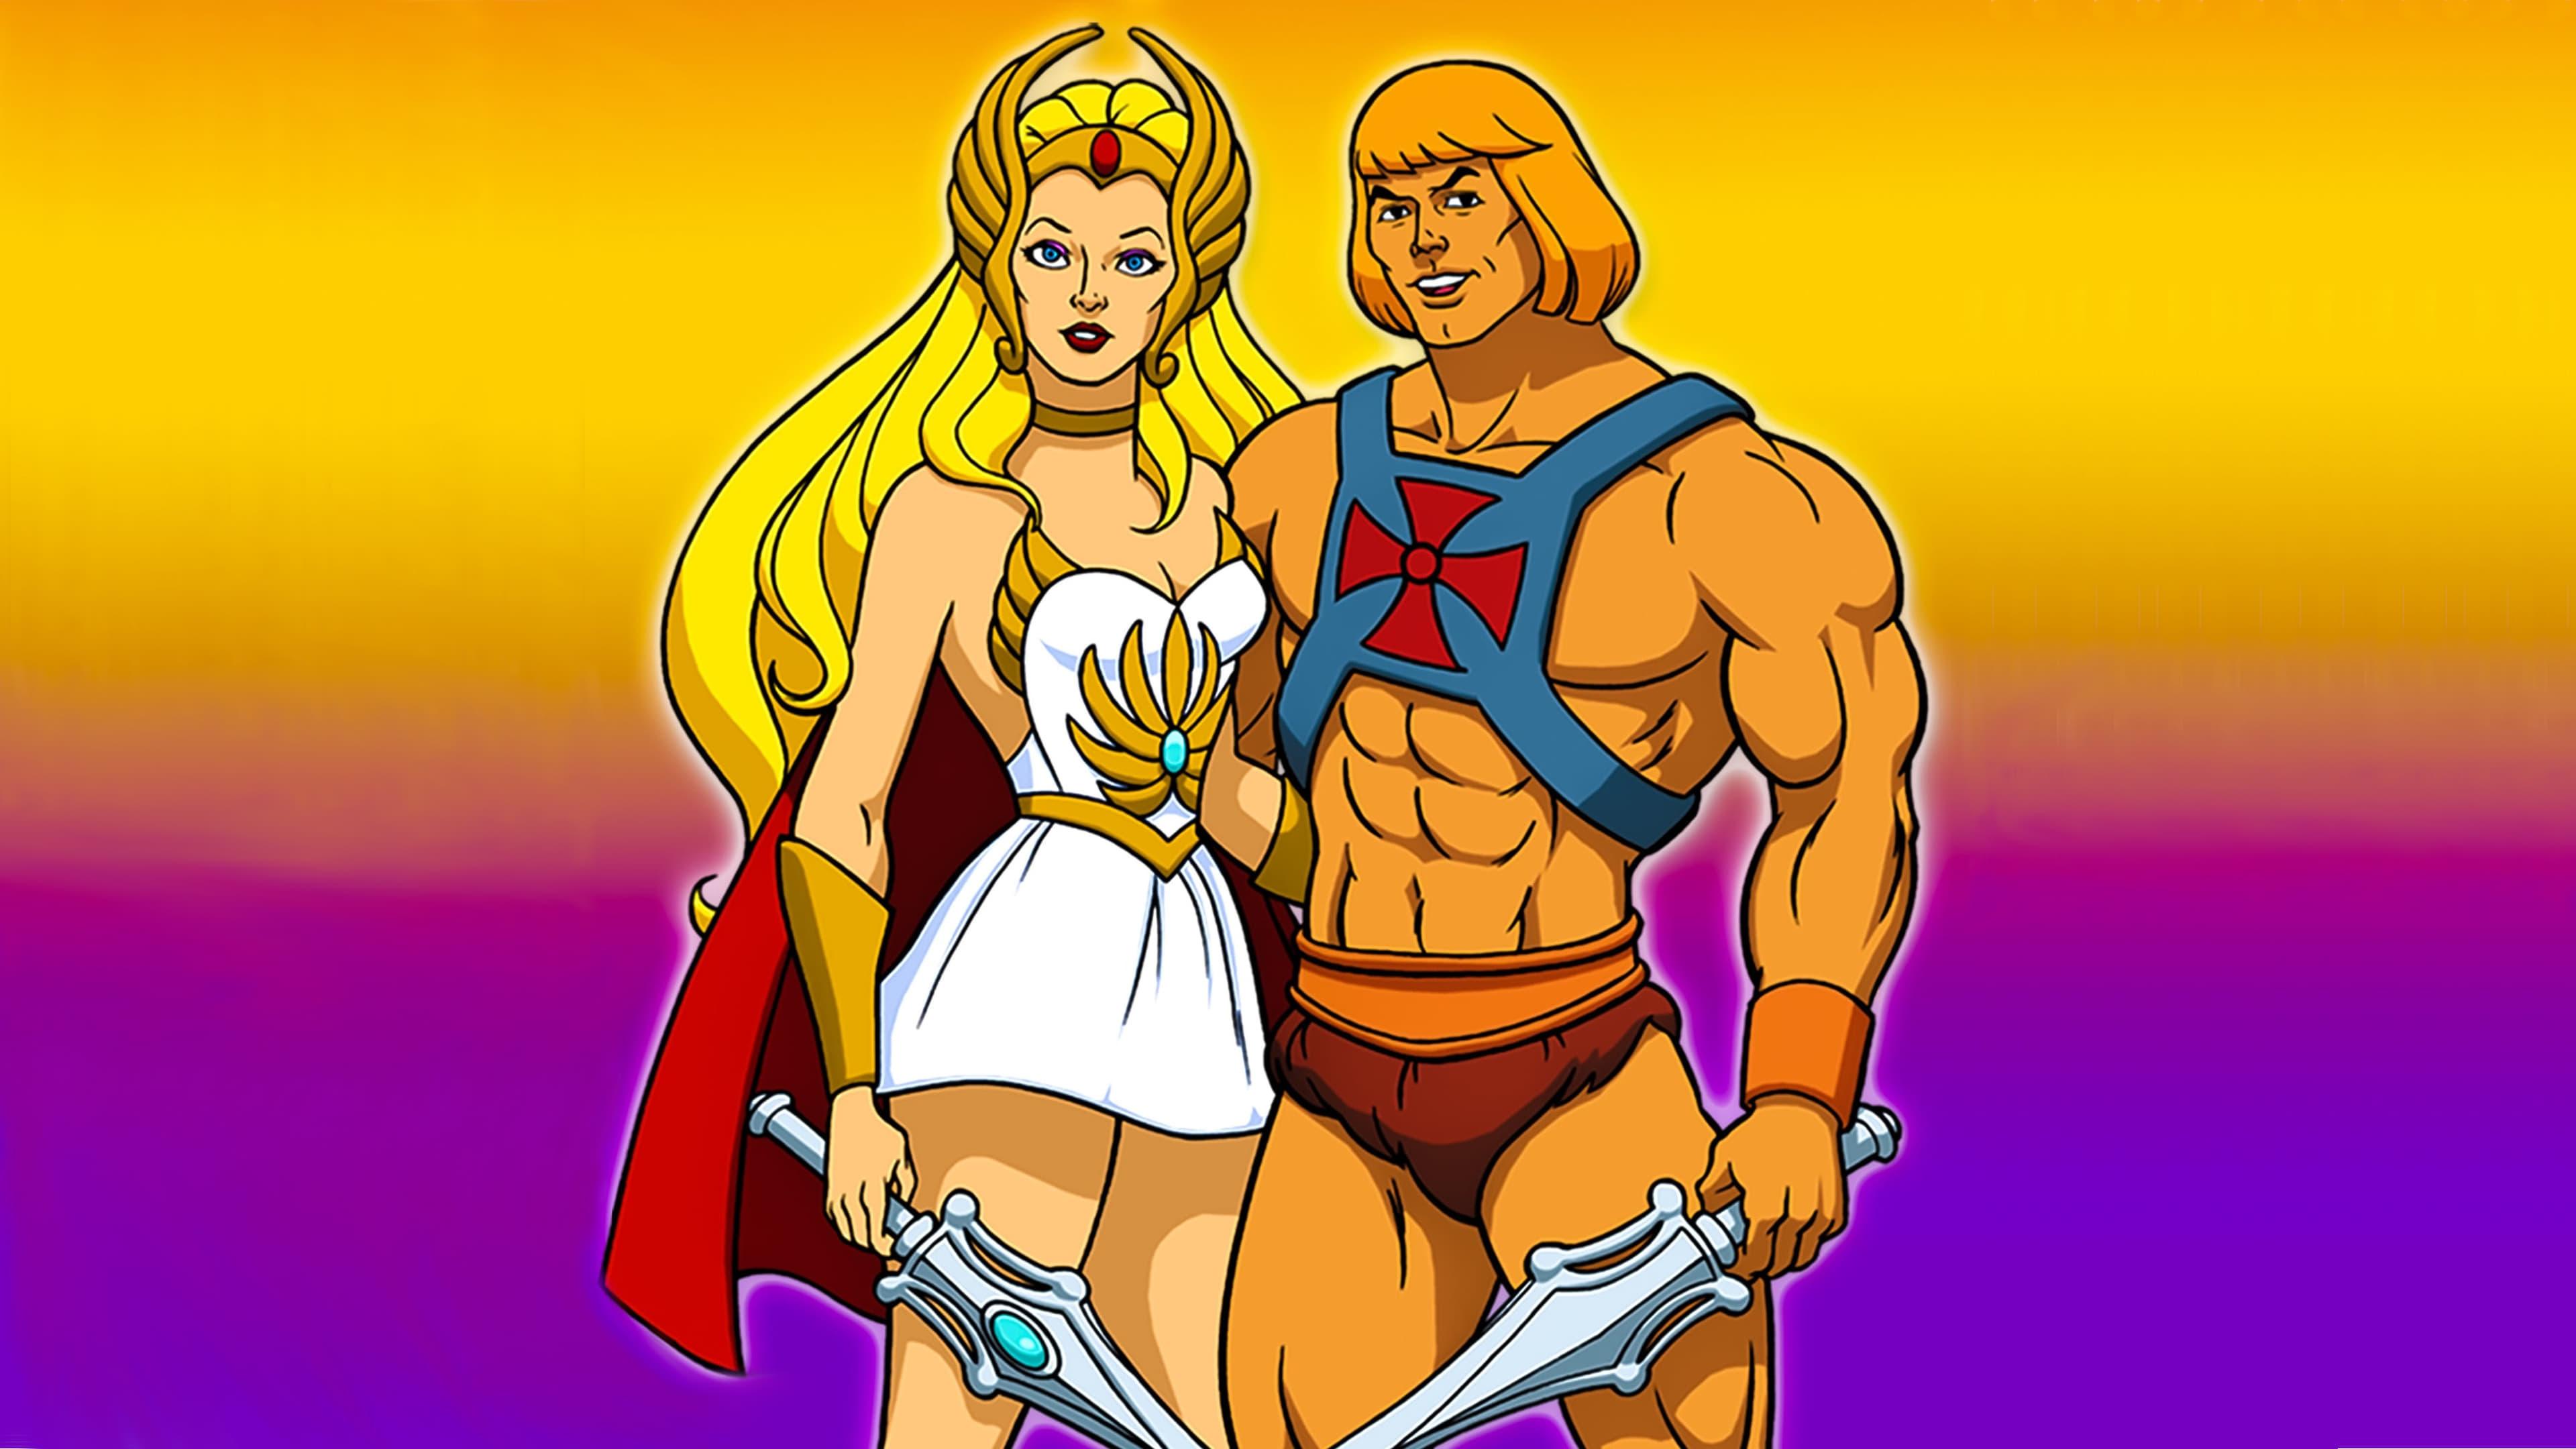 He-Man and She-Ra: The Secret of the Sword backdrop